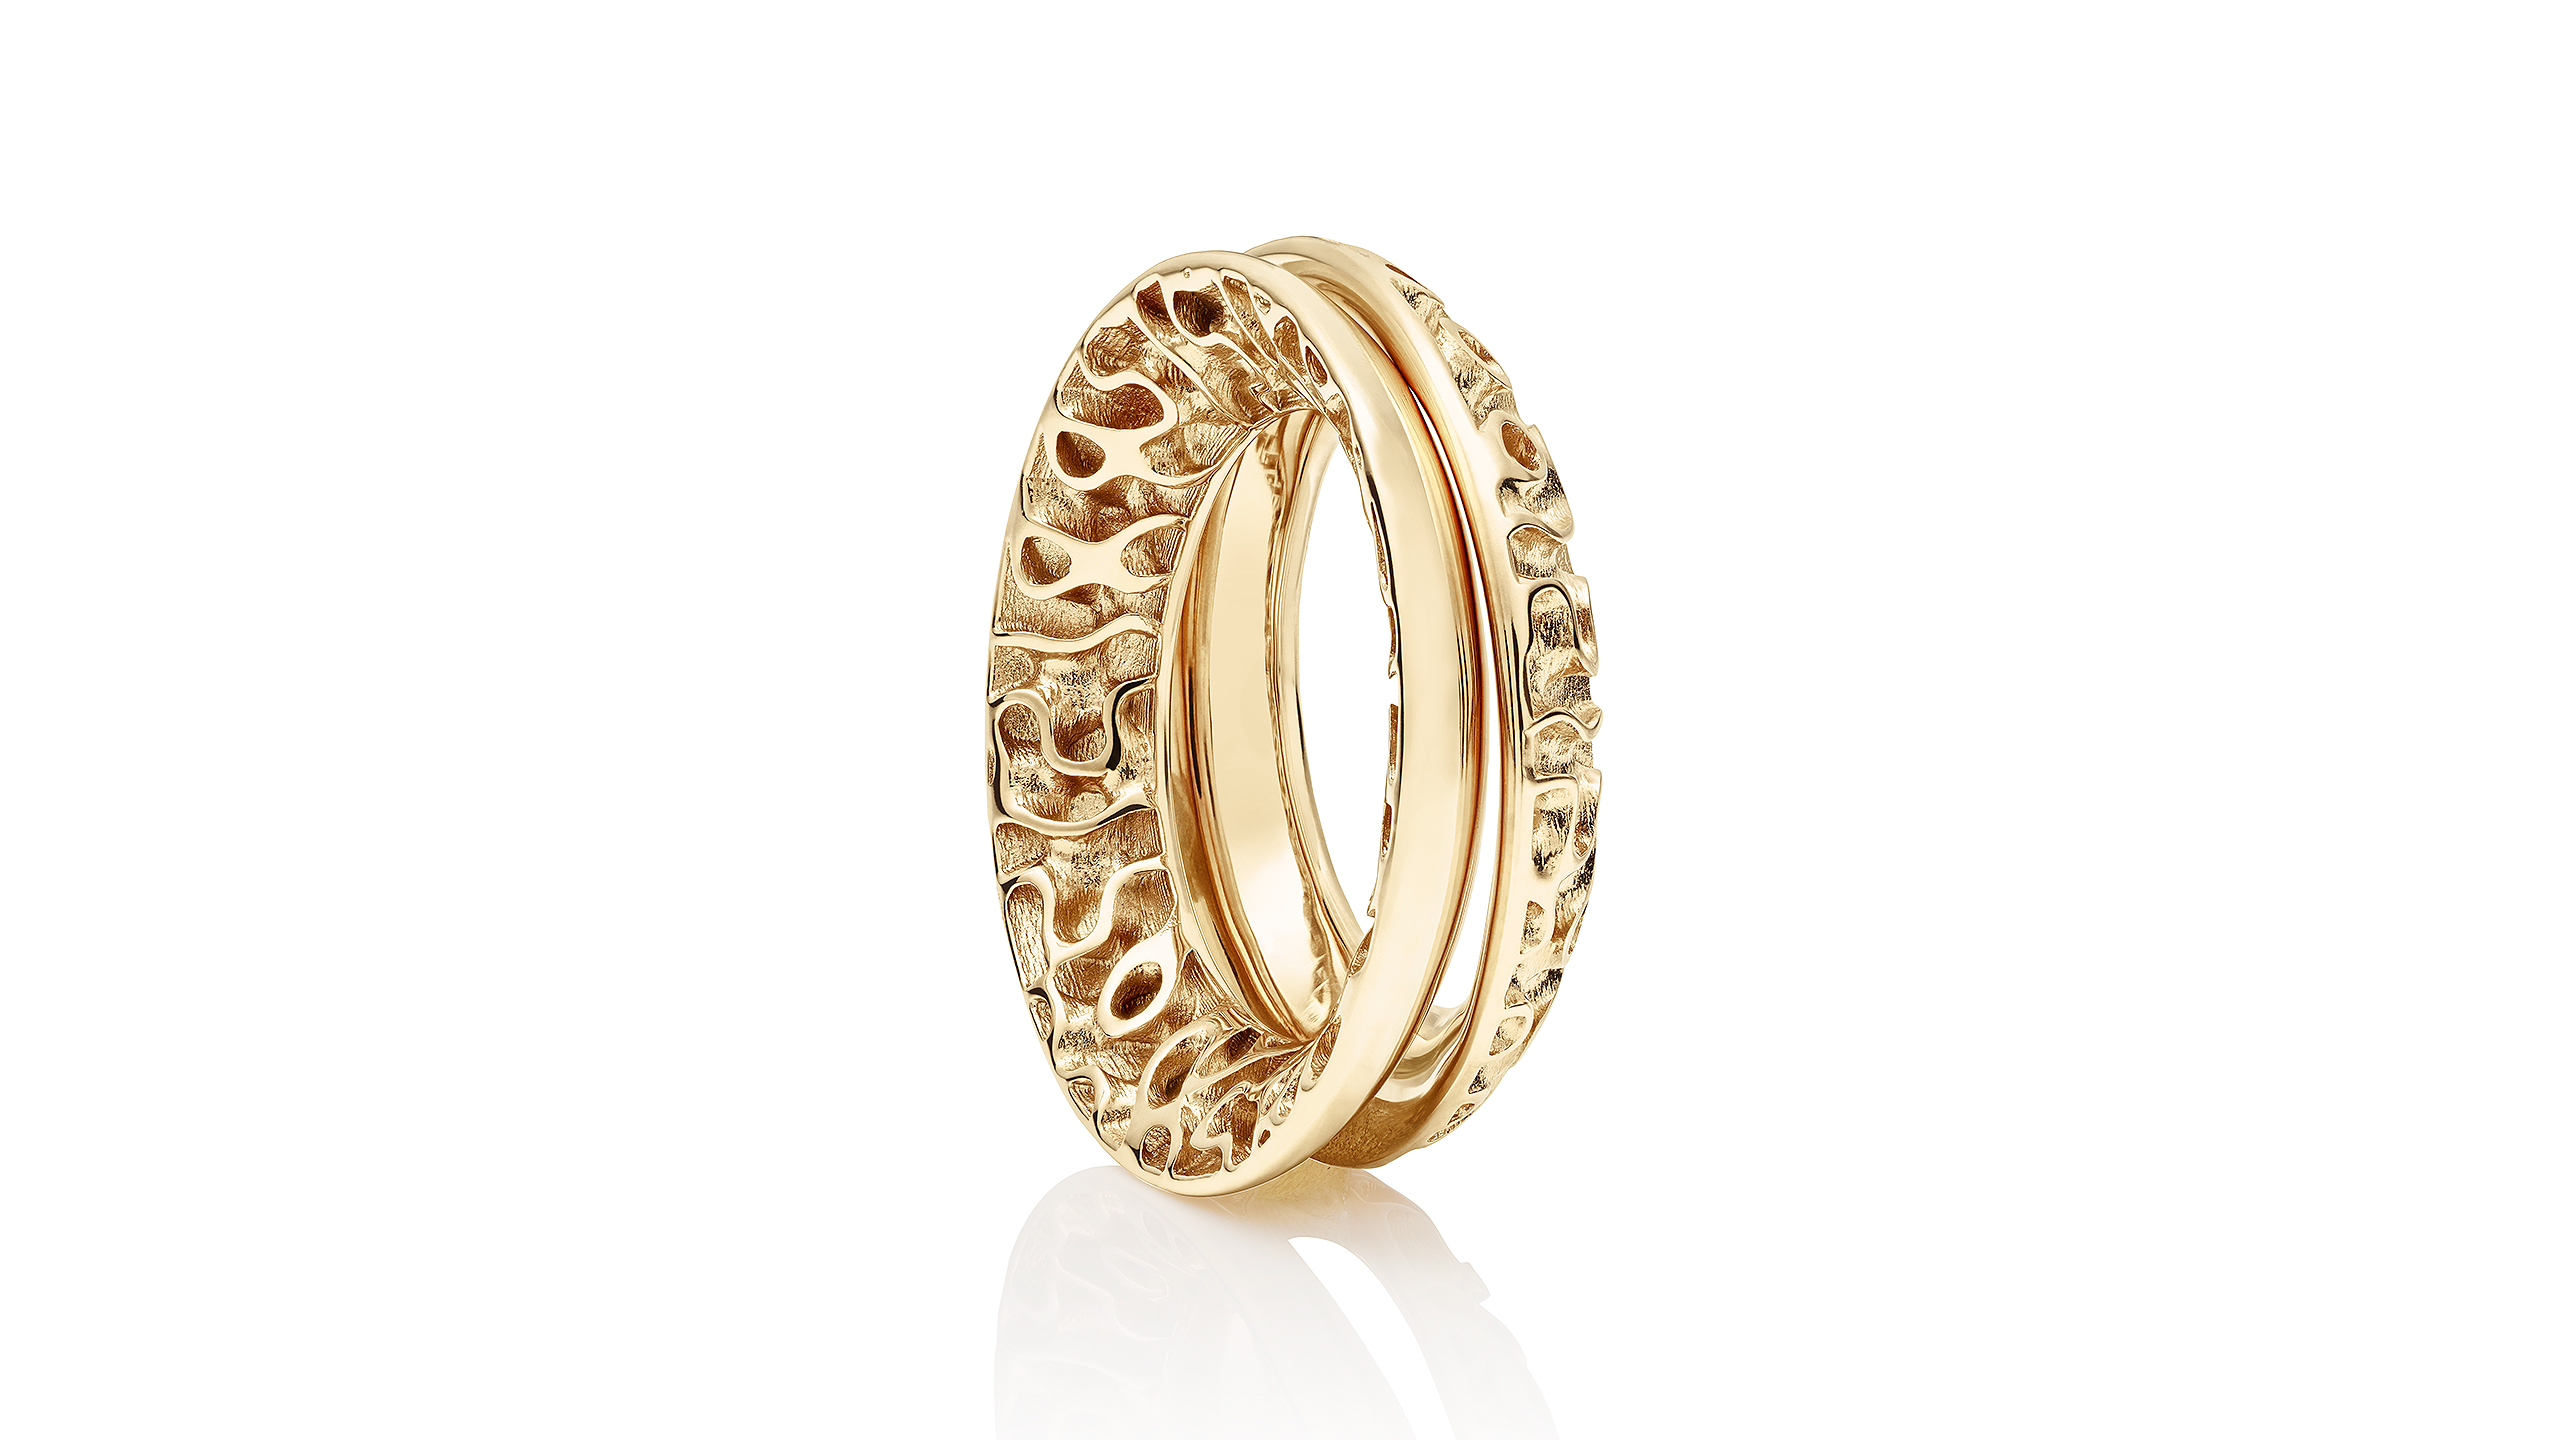 https://towejewels.com/wp-content/uploads/2018/01/Saturne_RingS_YG_TOWE_STACK_OK_2560x1440_overview_web.jpg